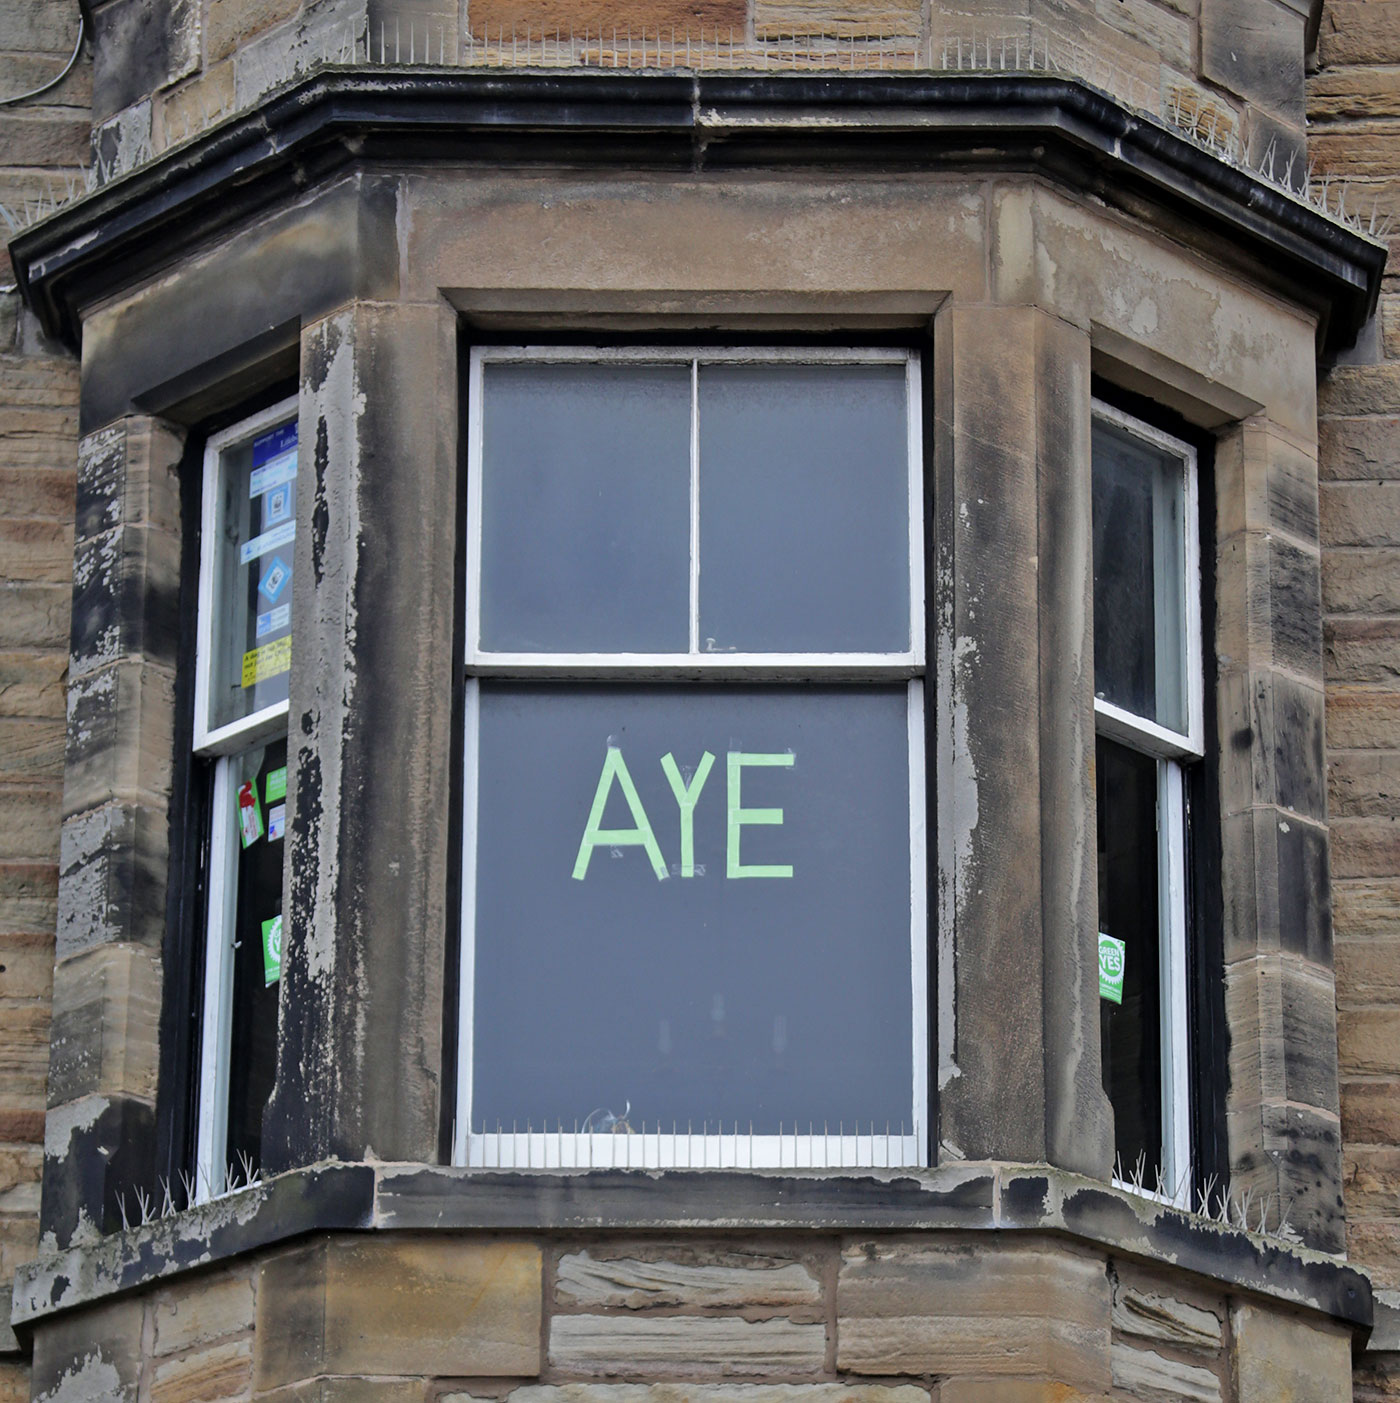 Photos taken in Edinburgh on the two days leading up to the Scottish Referendum Vote on 18 September 2014  -  'Aye' on a window in the Tenements at Starbank Road, Newhaven